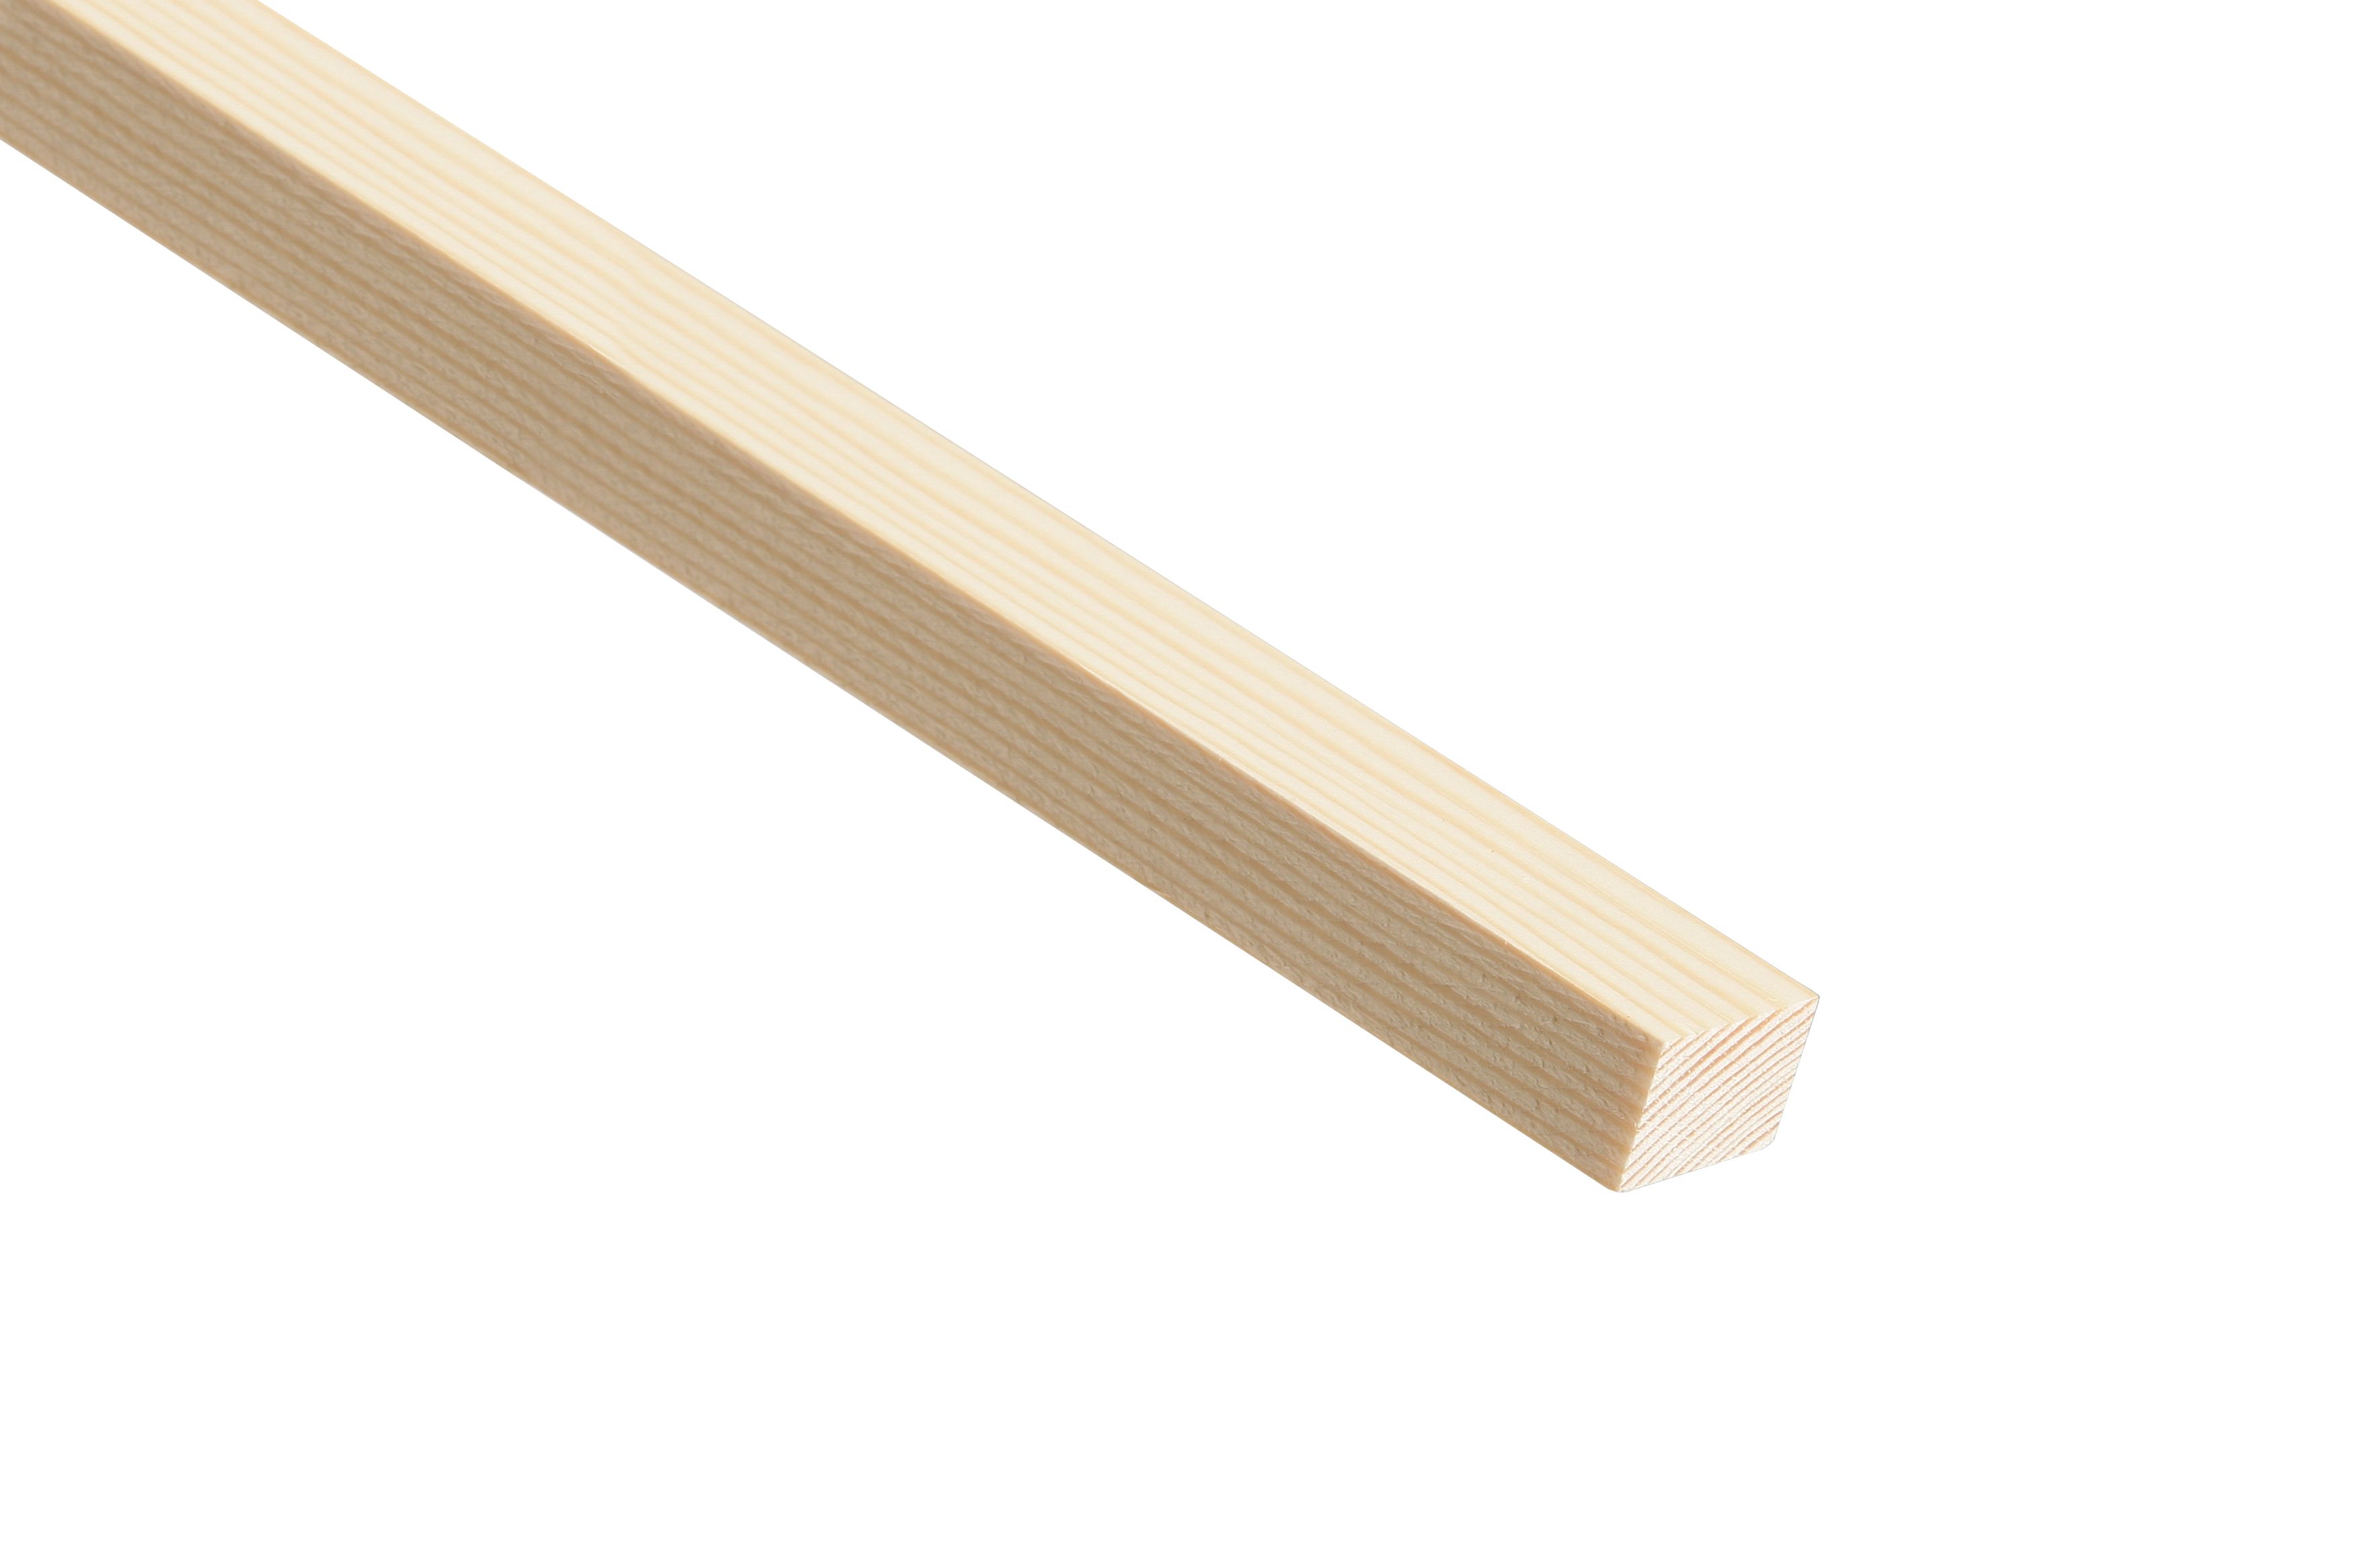 Image of Wickes Pine Stripwood Moulding (PSE) - 21 x 25 x 2400mm